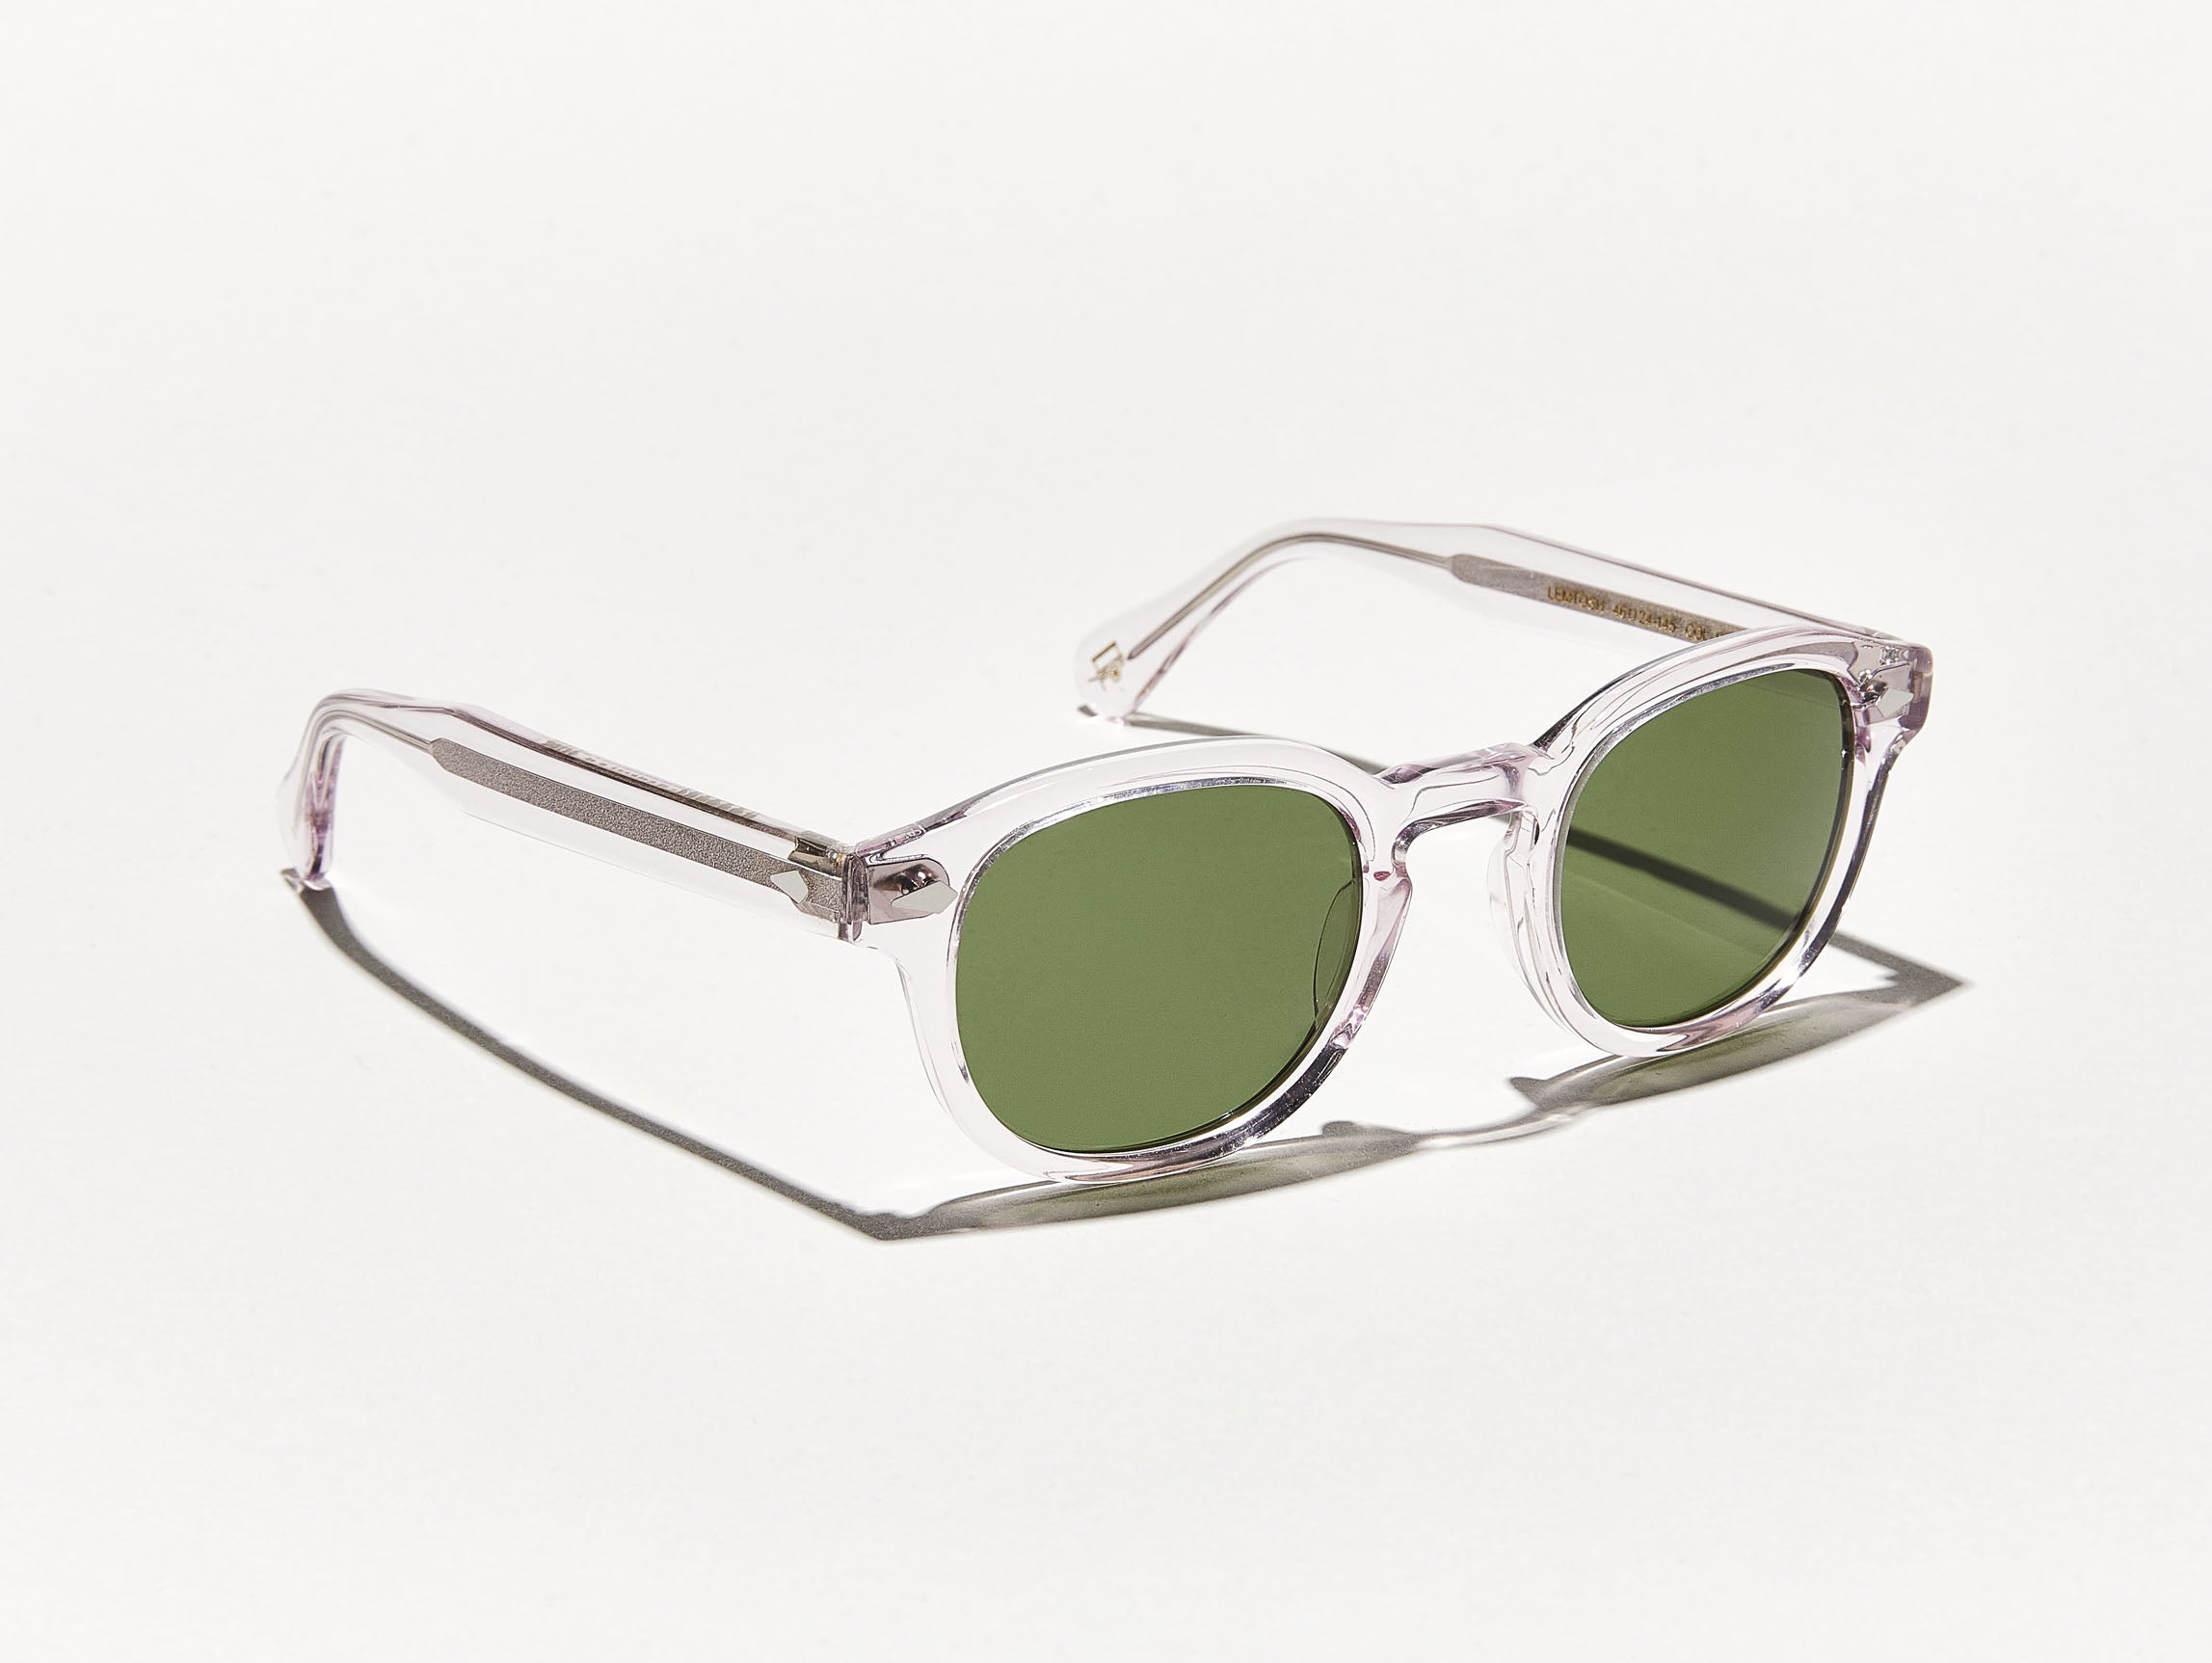 #color_blush | The LEMTOSH SUN in Blush with Calibar Green Glass Lenses